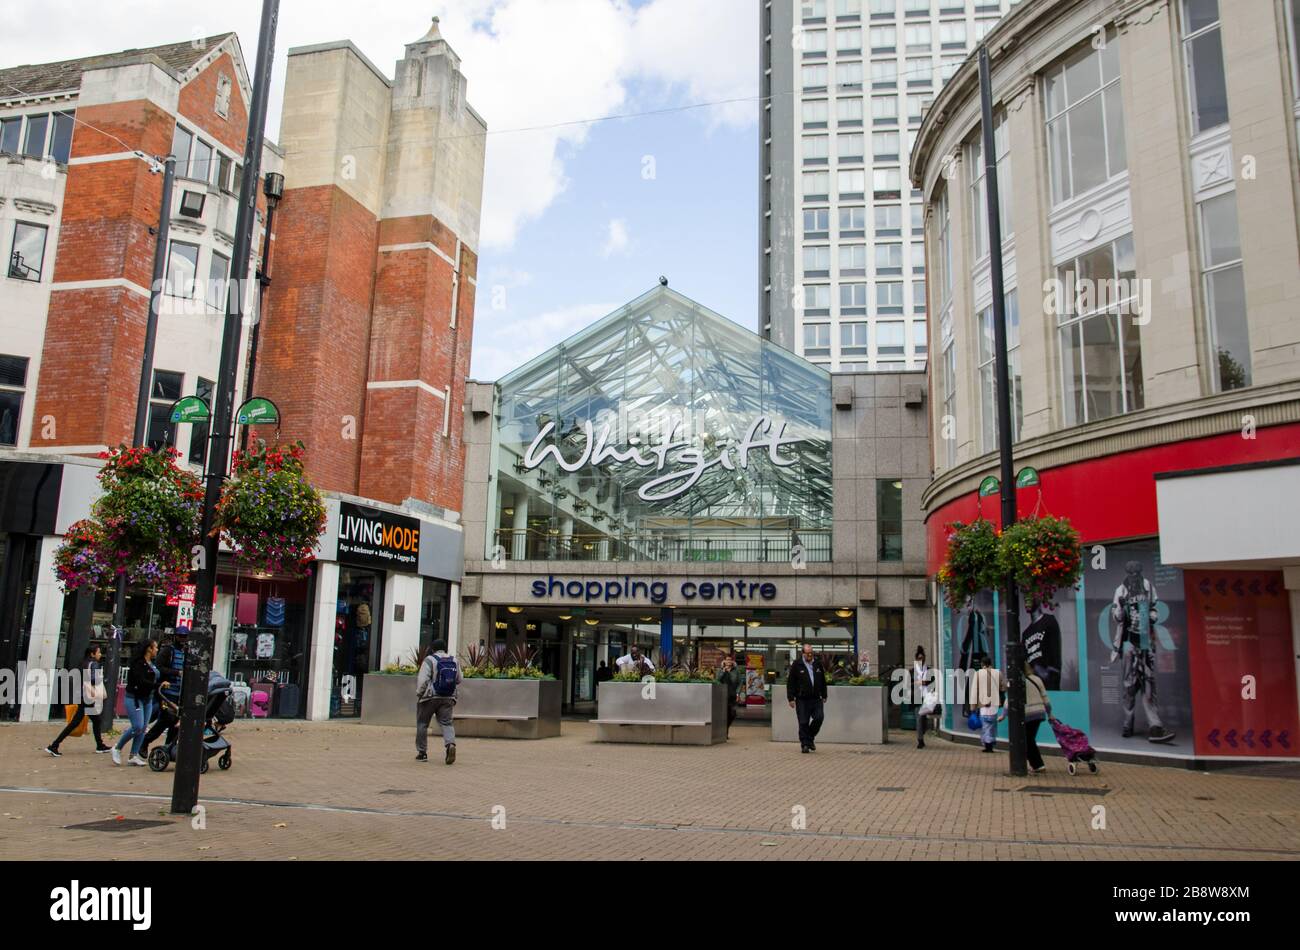 Croydon, UK - October 2, 2019: Shoppers at the entrance to the landmark Whitgift Shopping Centre in Croydon, South London on a sunny autumn afternoon. Stock Photo